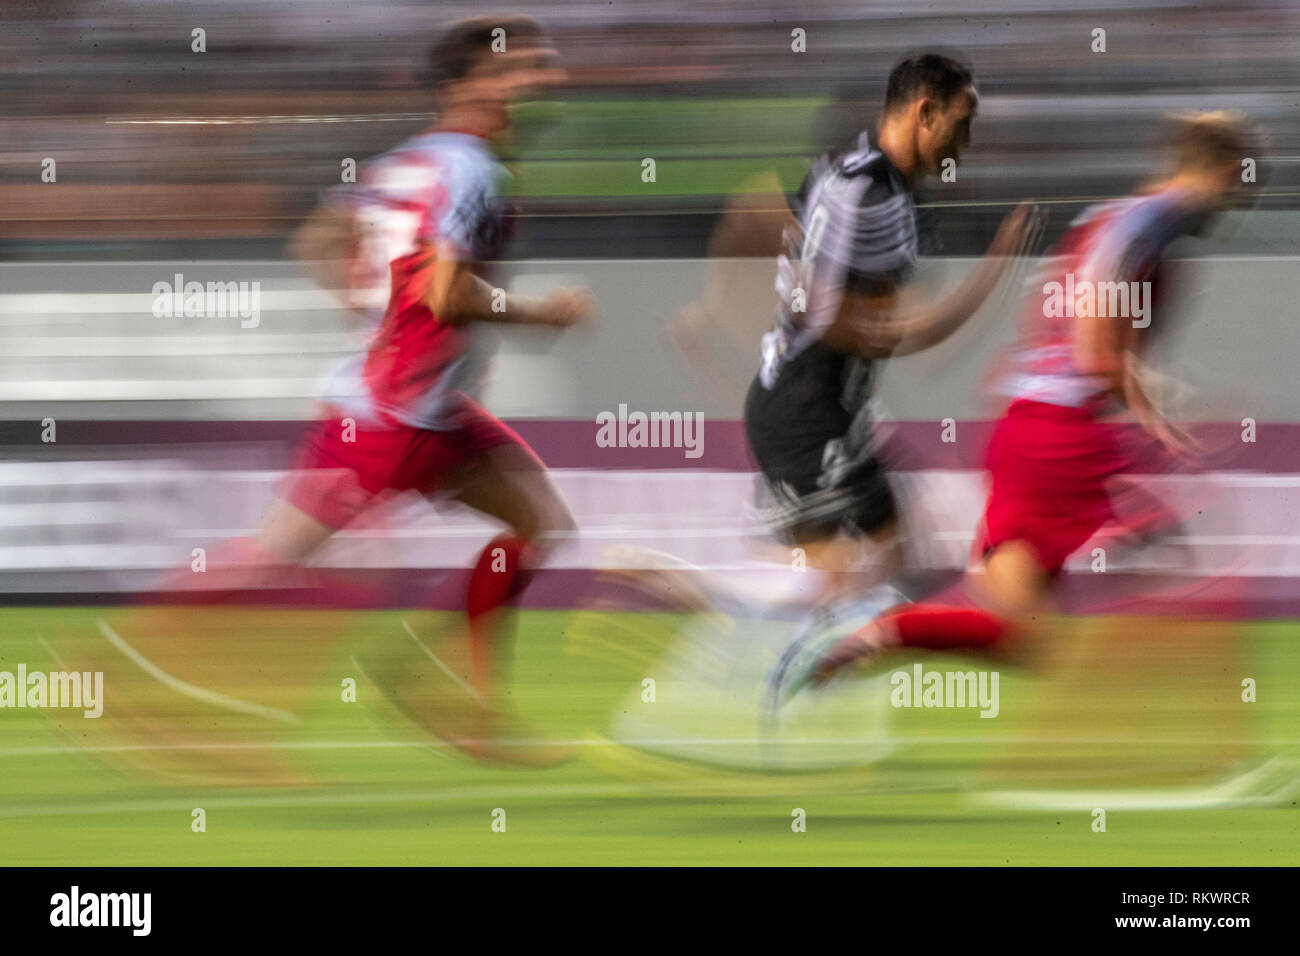 MG - Belo Horizonte - 12/02/2019 - Libertadores 2019, Atletico x Danubio - player Ricardo Oliveira of Atletico-MG during match against the Danube at Independencia Stadium for the championship Libertadores 2019. Photo: Pedro Vale / AGIF Stock Photo